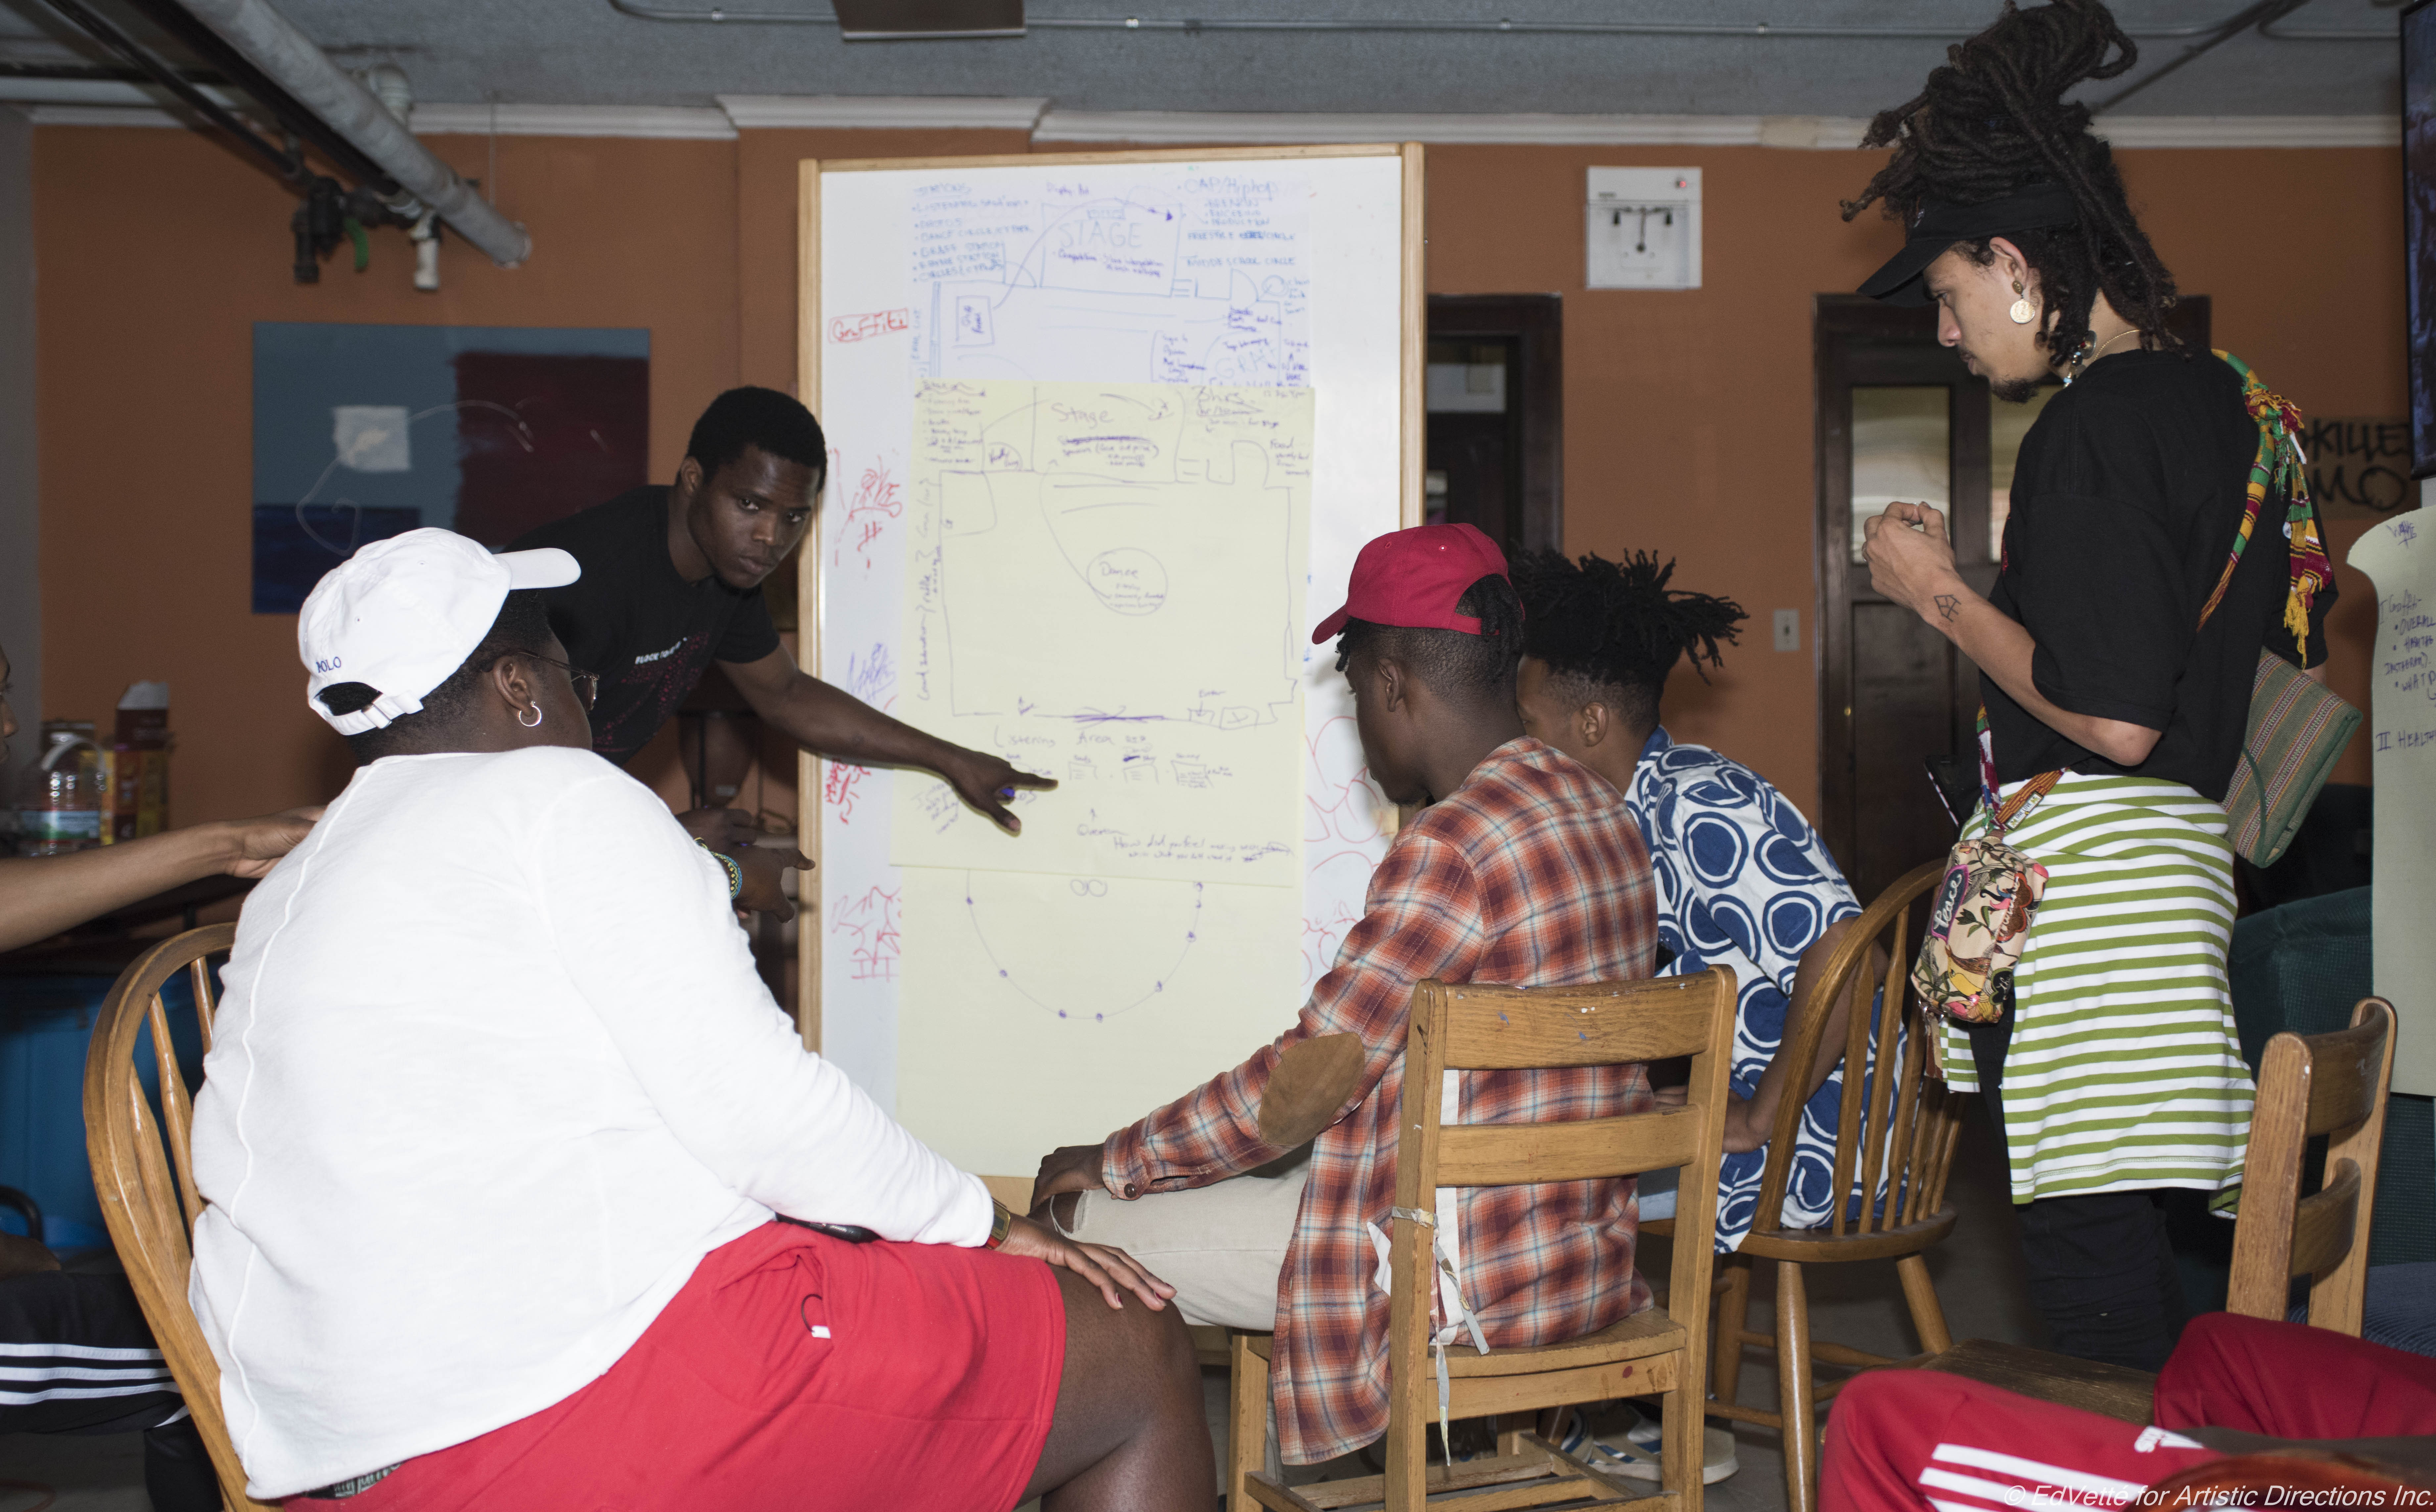 The hub director and four teaching artists for Envisioning Justice at Circles and Ciphers gather around a whiteboard to plan the layout of for the culminating event of their first session.